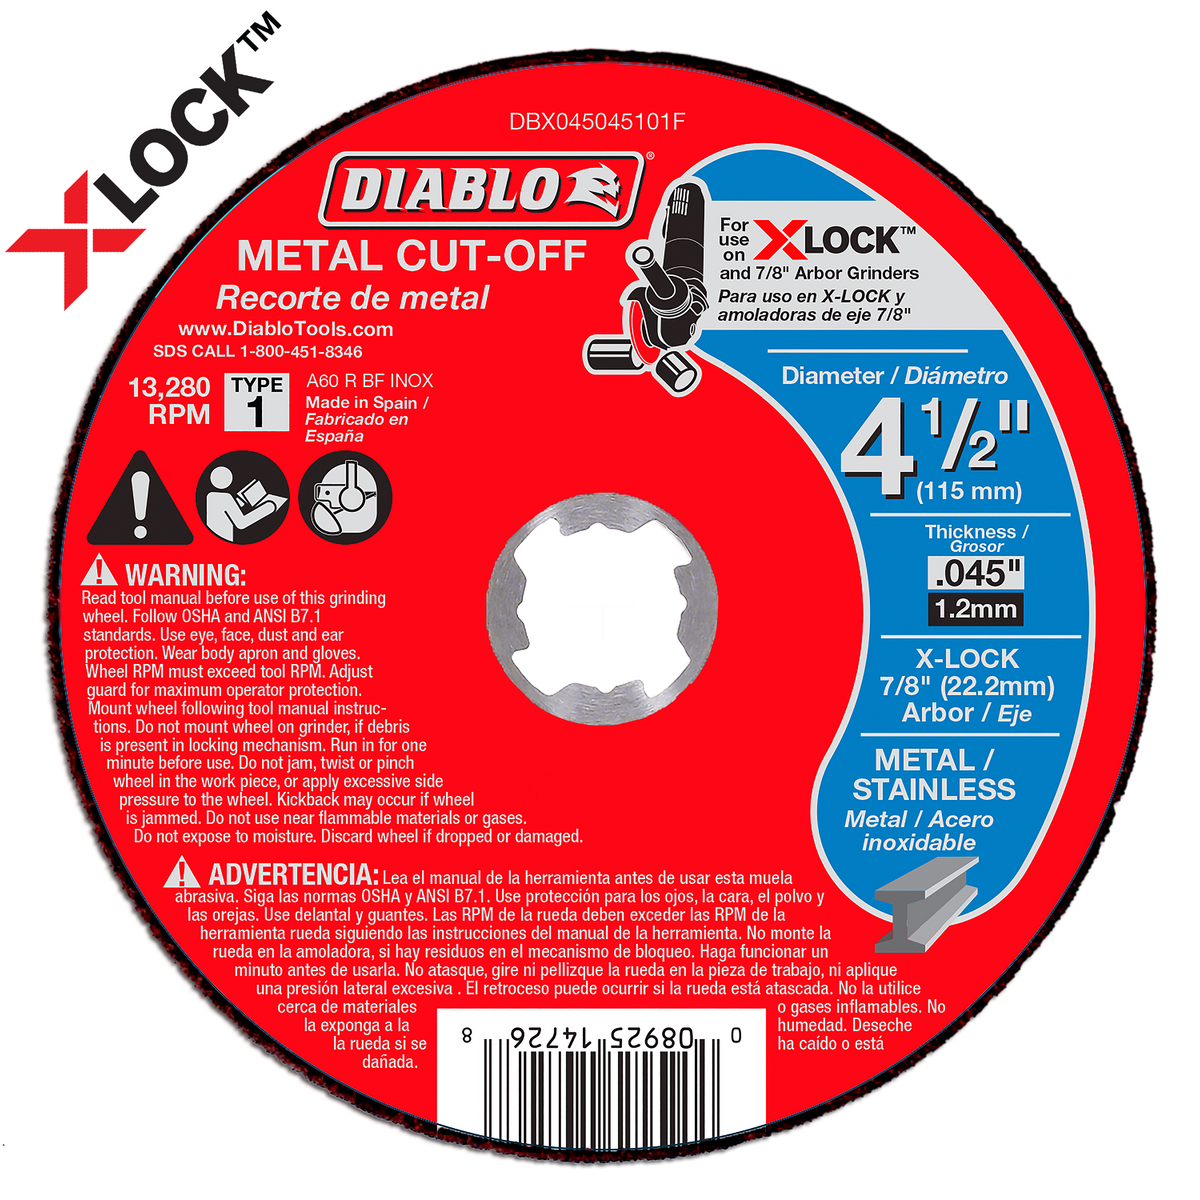 Diablo Metal Cut-Off Disc for X-Lock and All Grinders